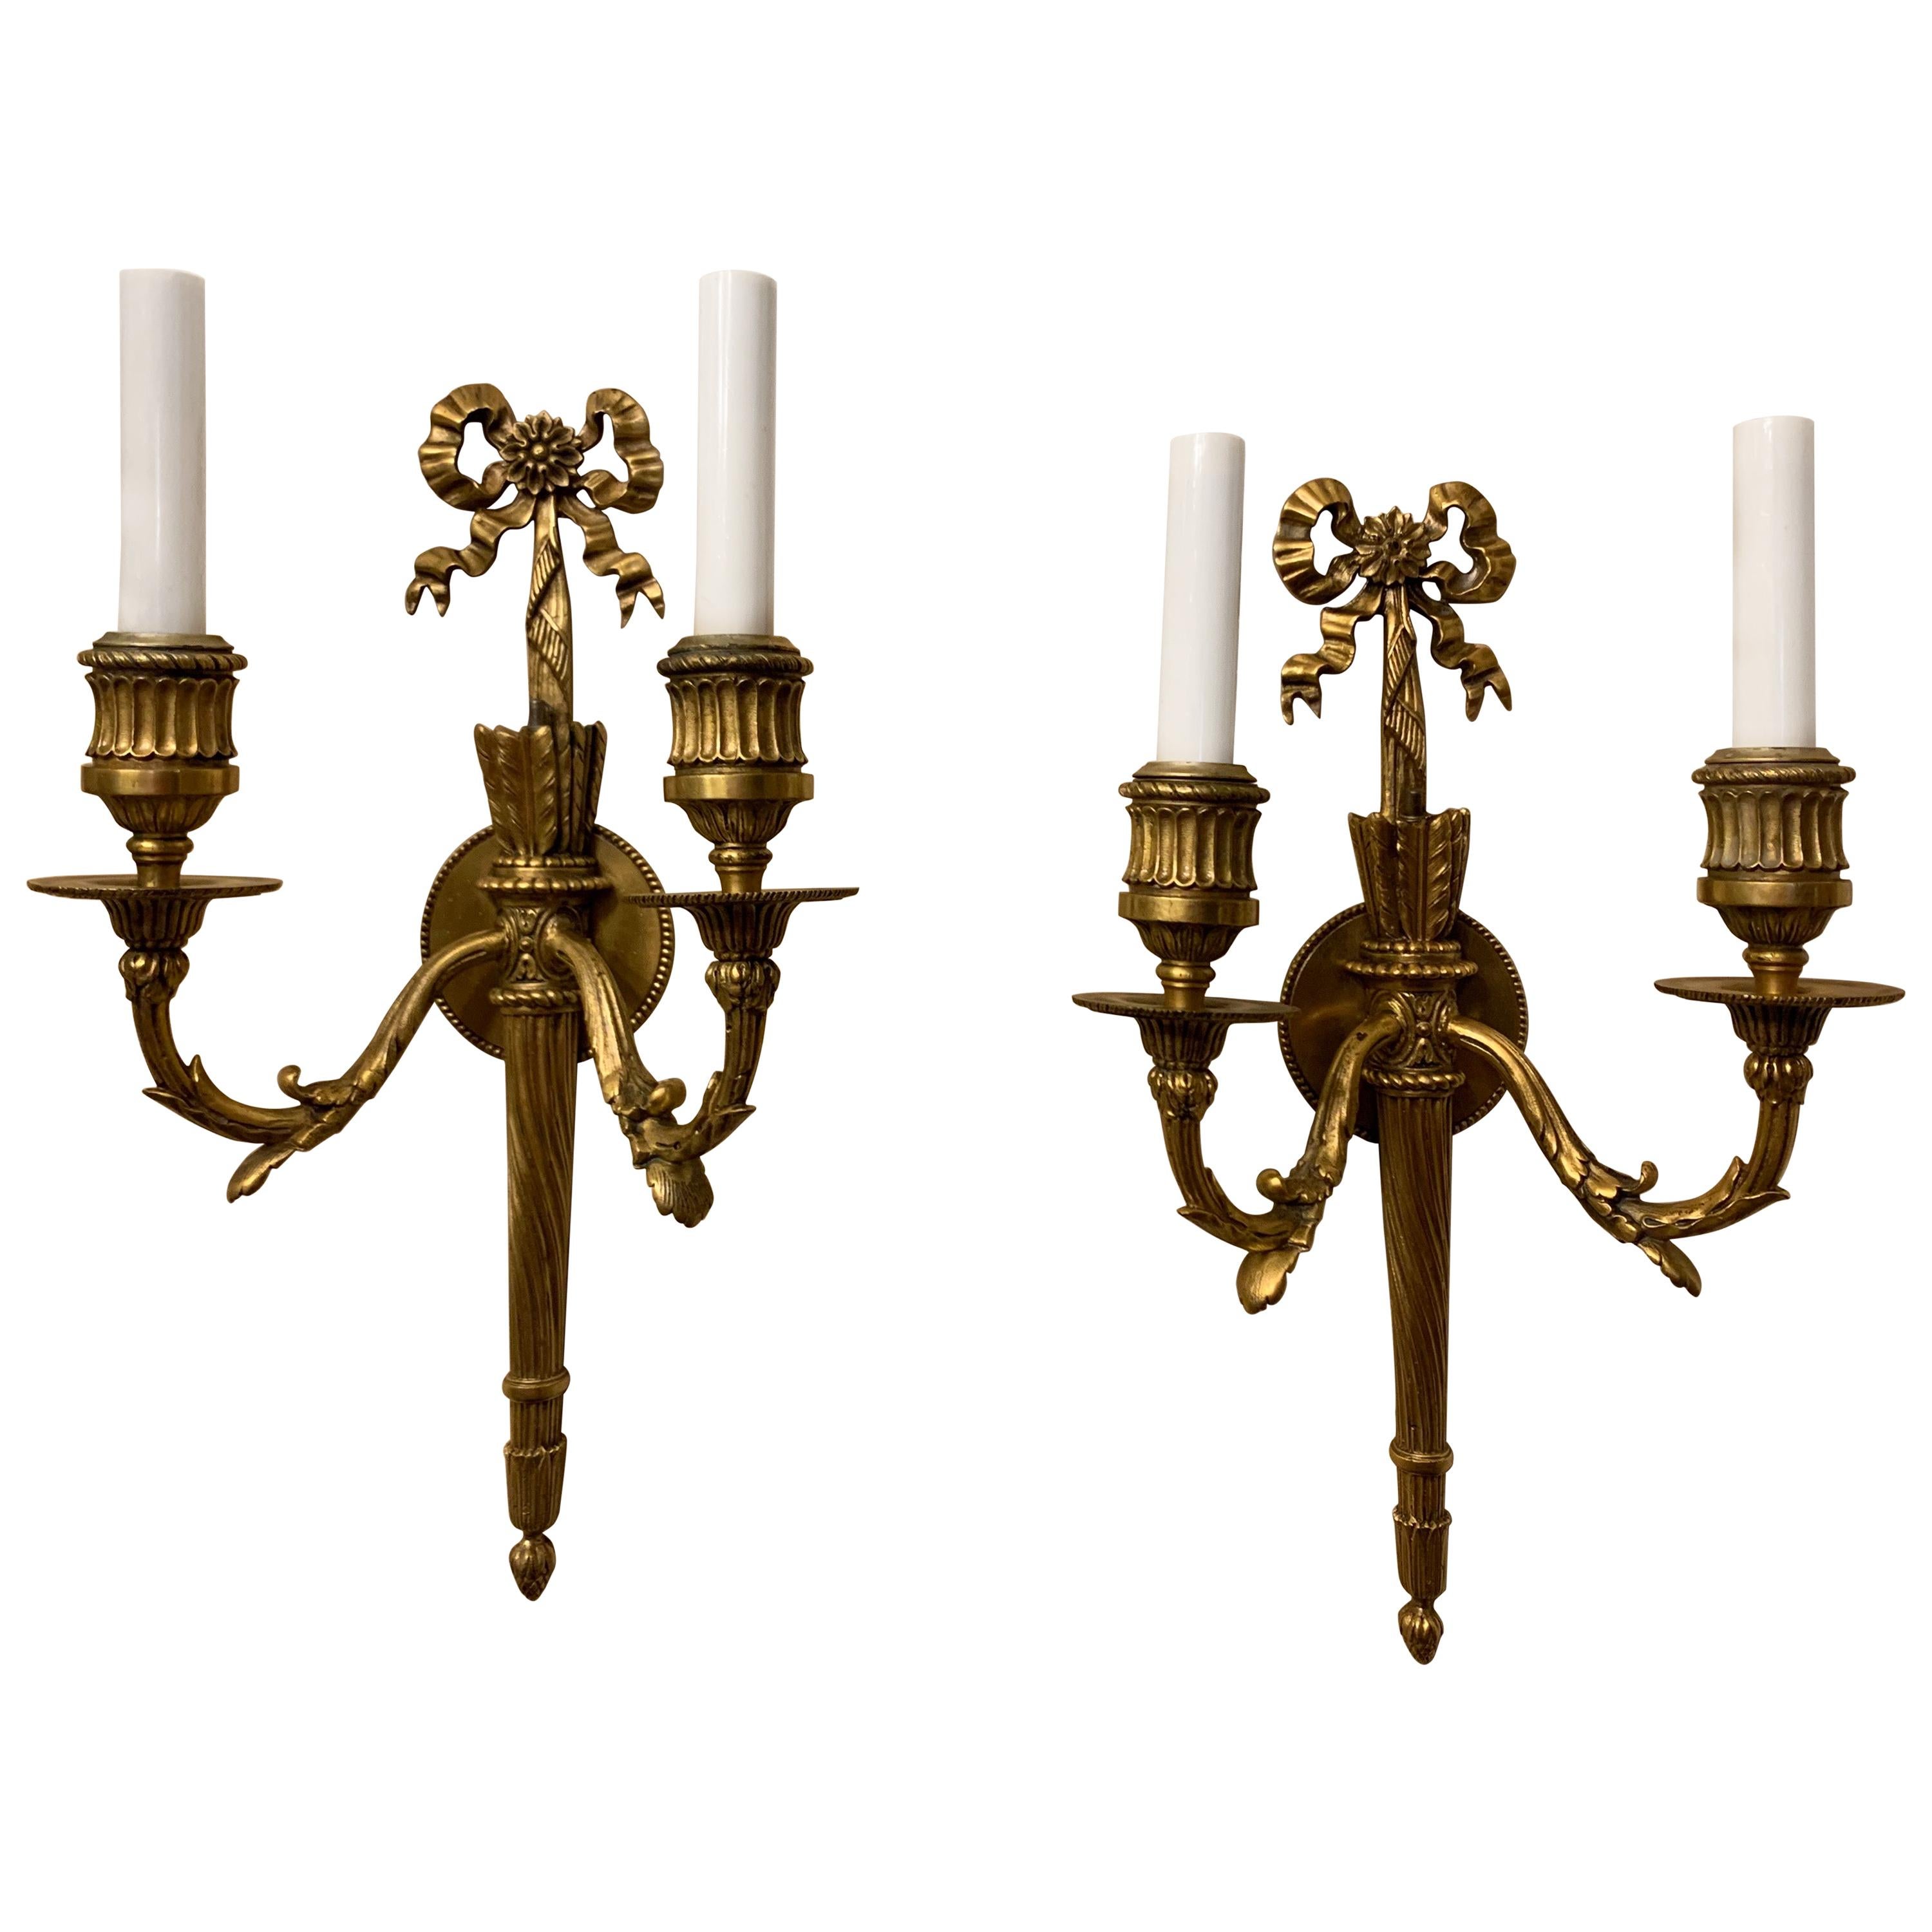 Wonderful French Gilt Doré Bronze Bow Torchiere Caldwell Two-Light Sconces, Pair